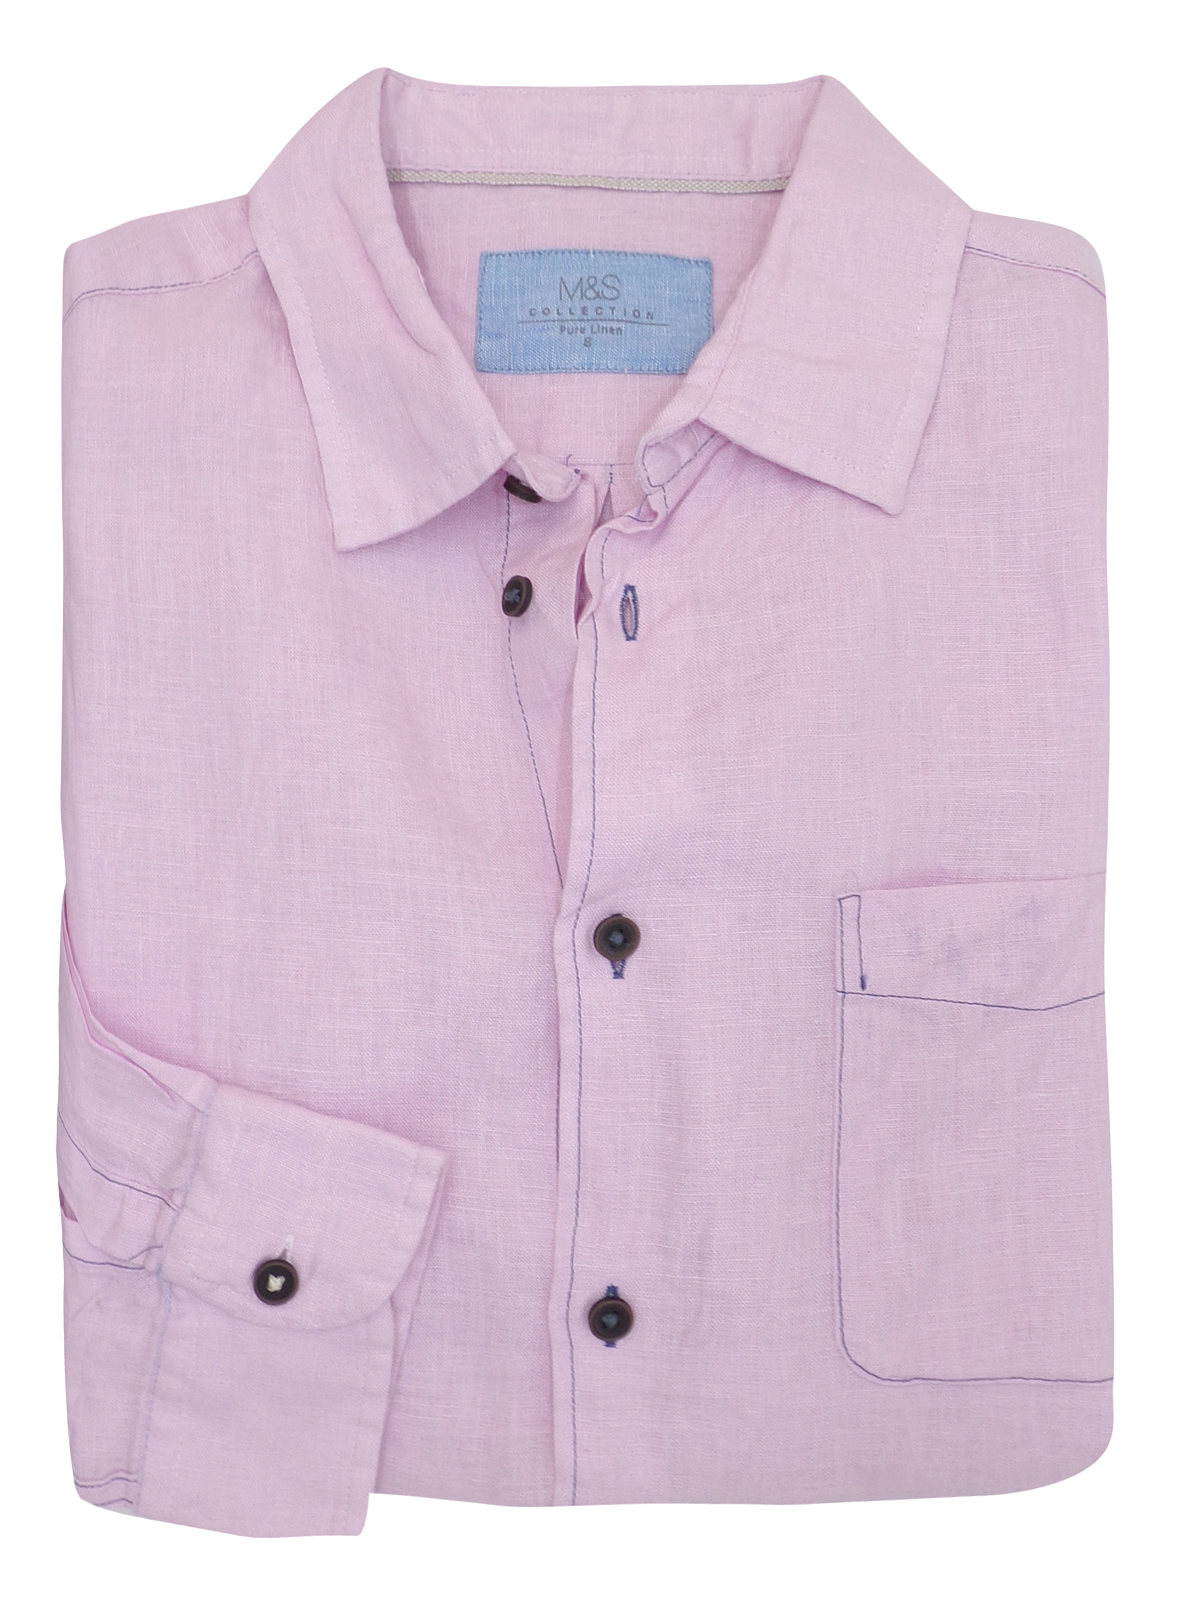 Marks and Spencer - - M&5 ASSORTED Pure Cotton Long Sleeve Shirts ...